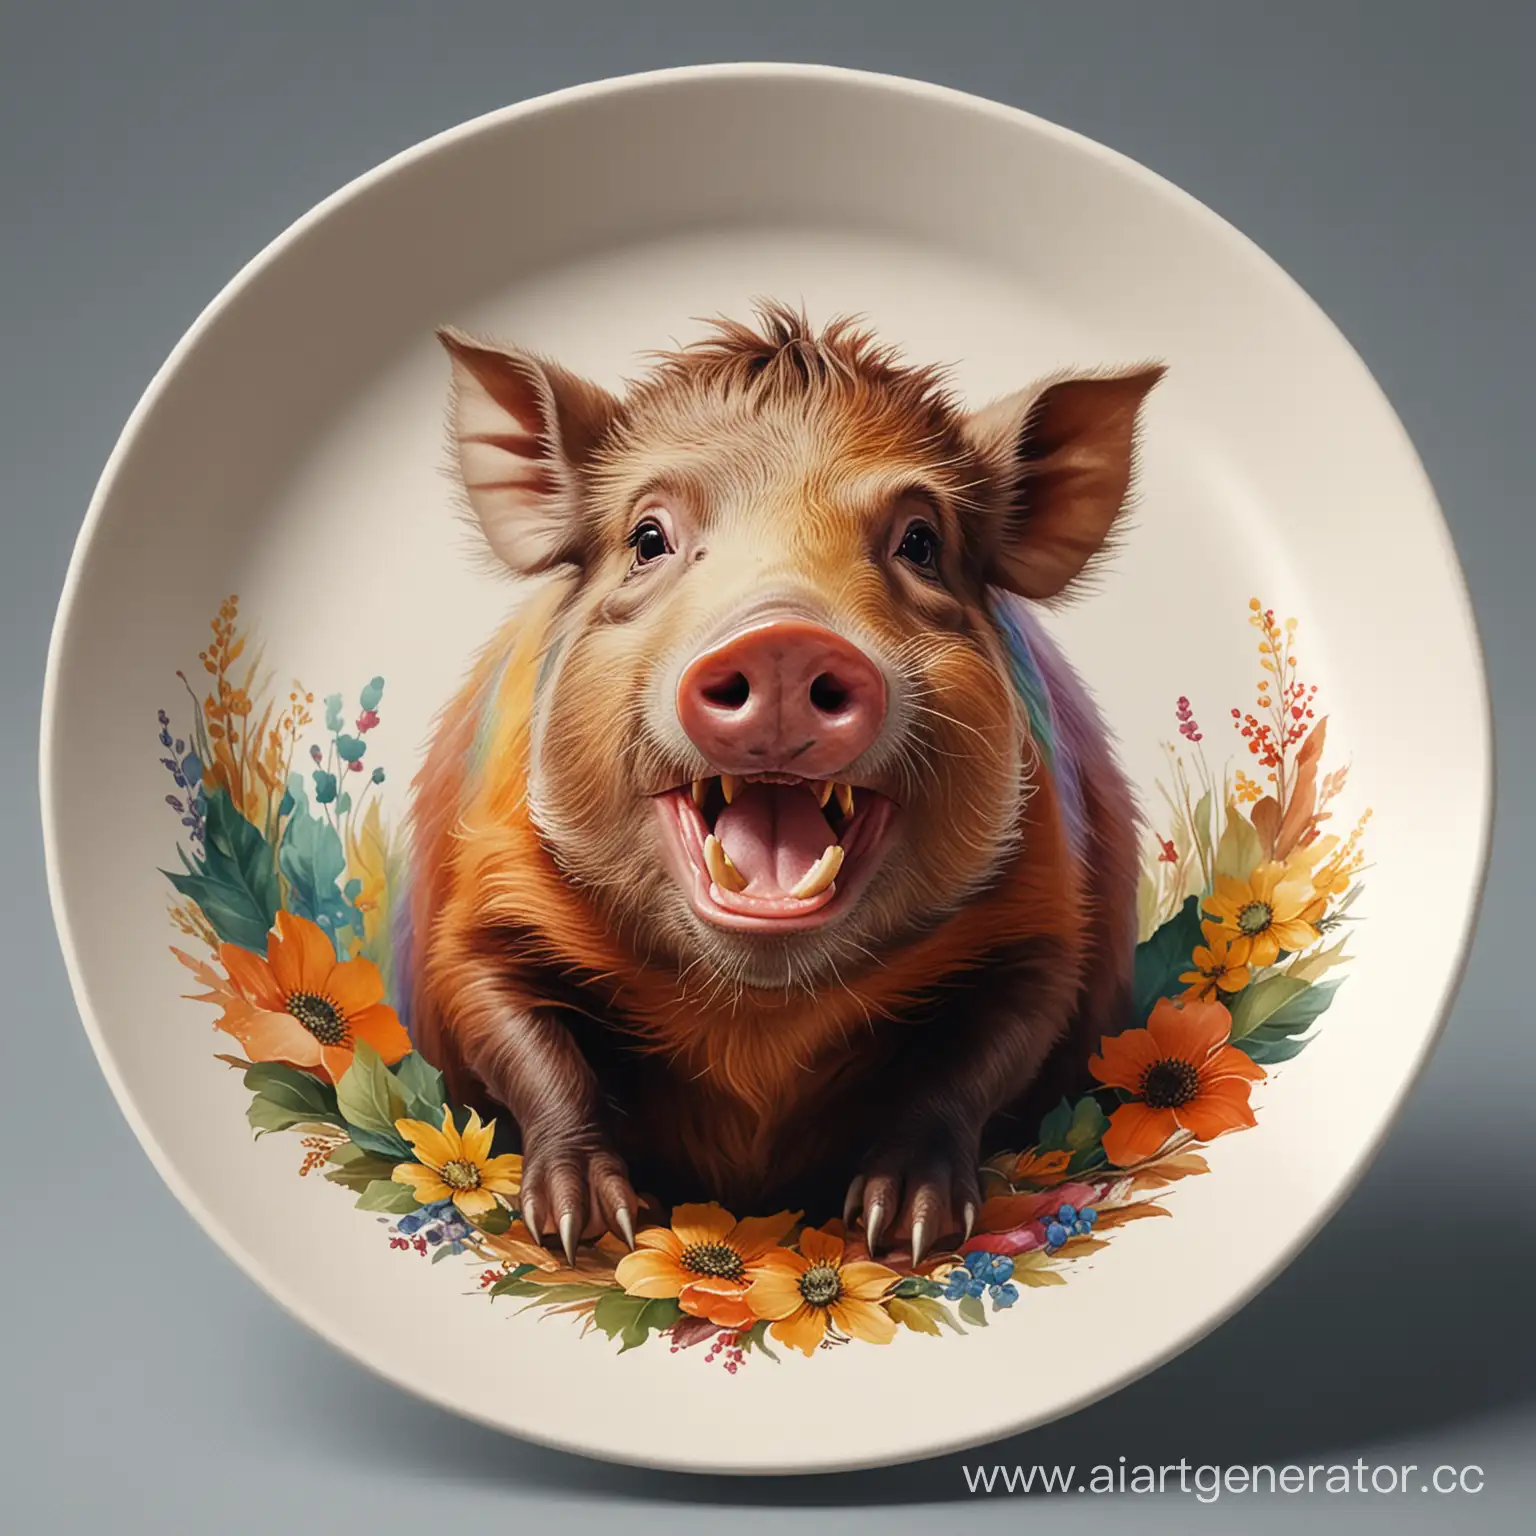 Vibrant-Realistic-Boar-Sitting-in-a-Plate